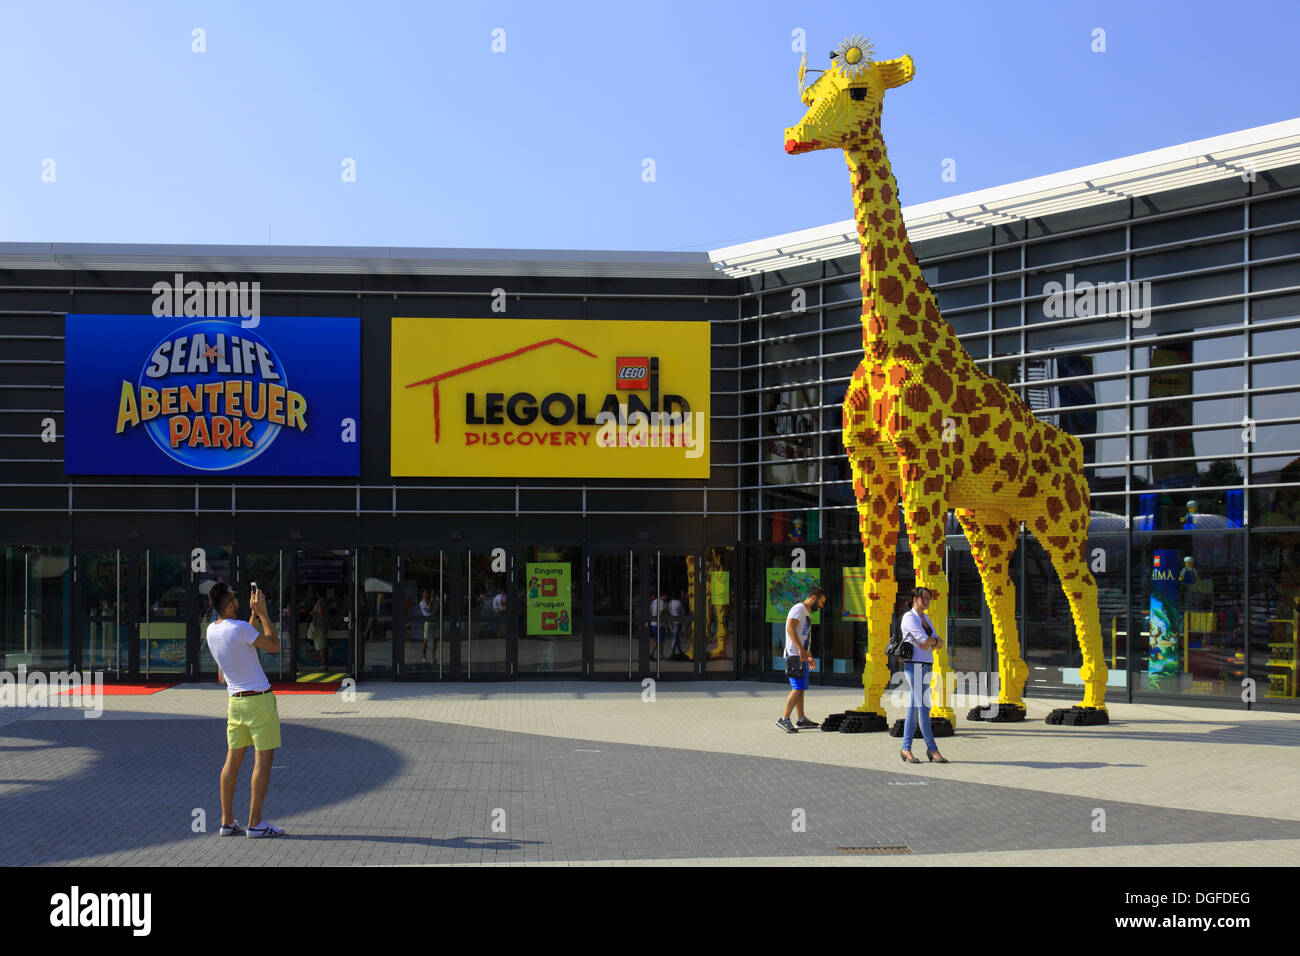 Legoland Oberhausen High Resolution Stock Photography and Images - Alamy